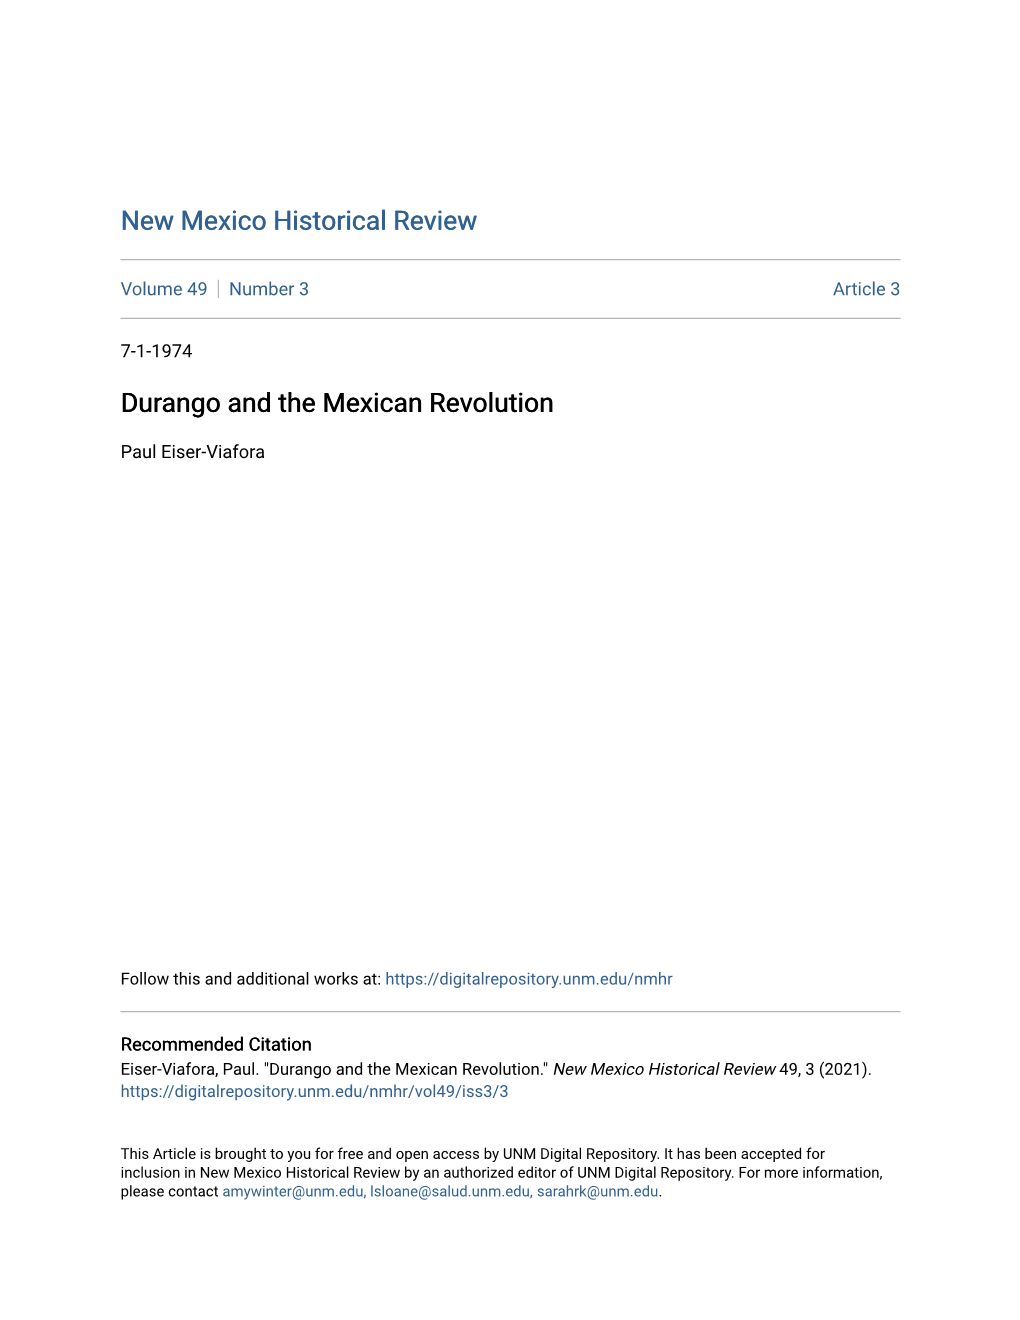 Durango and the Mexican Revolution